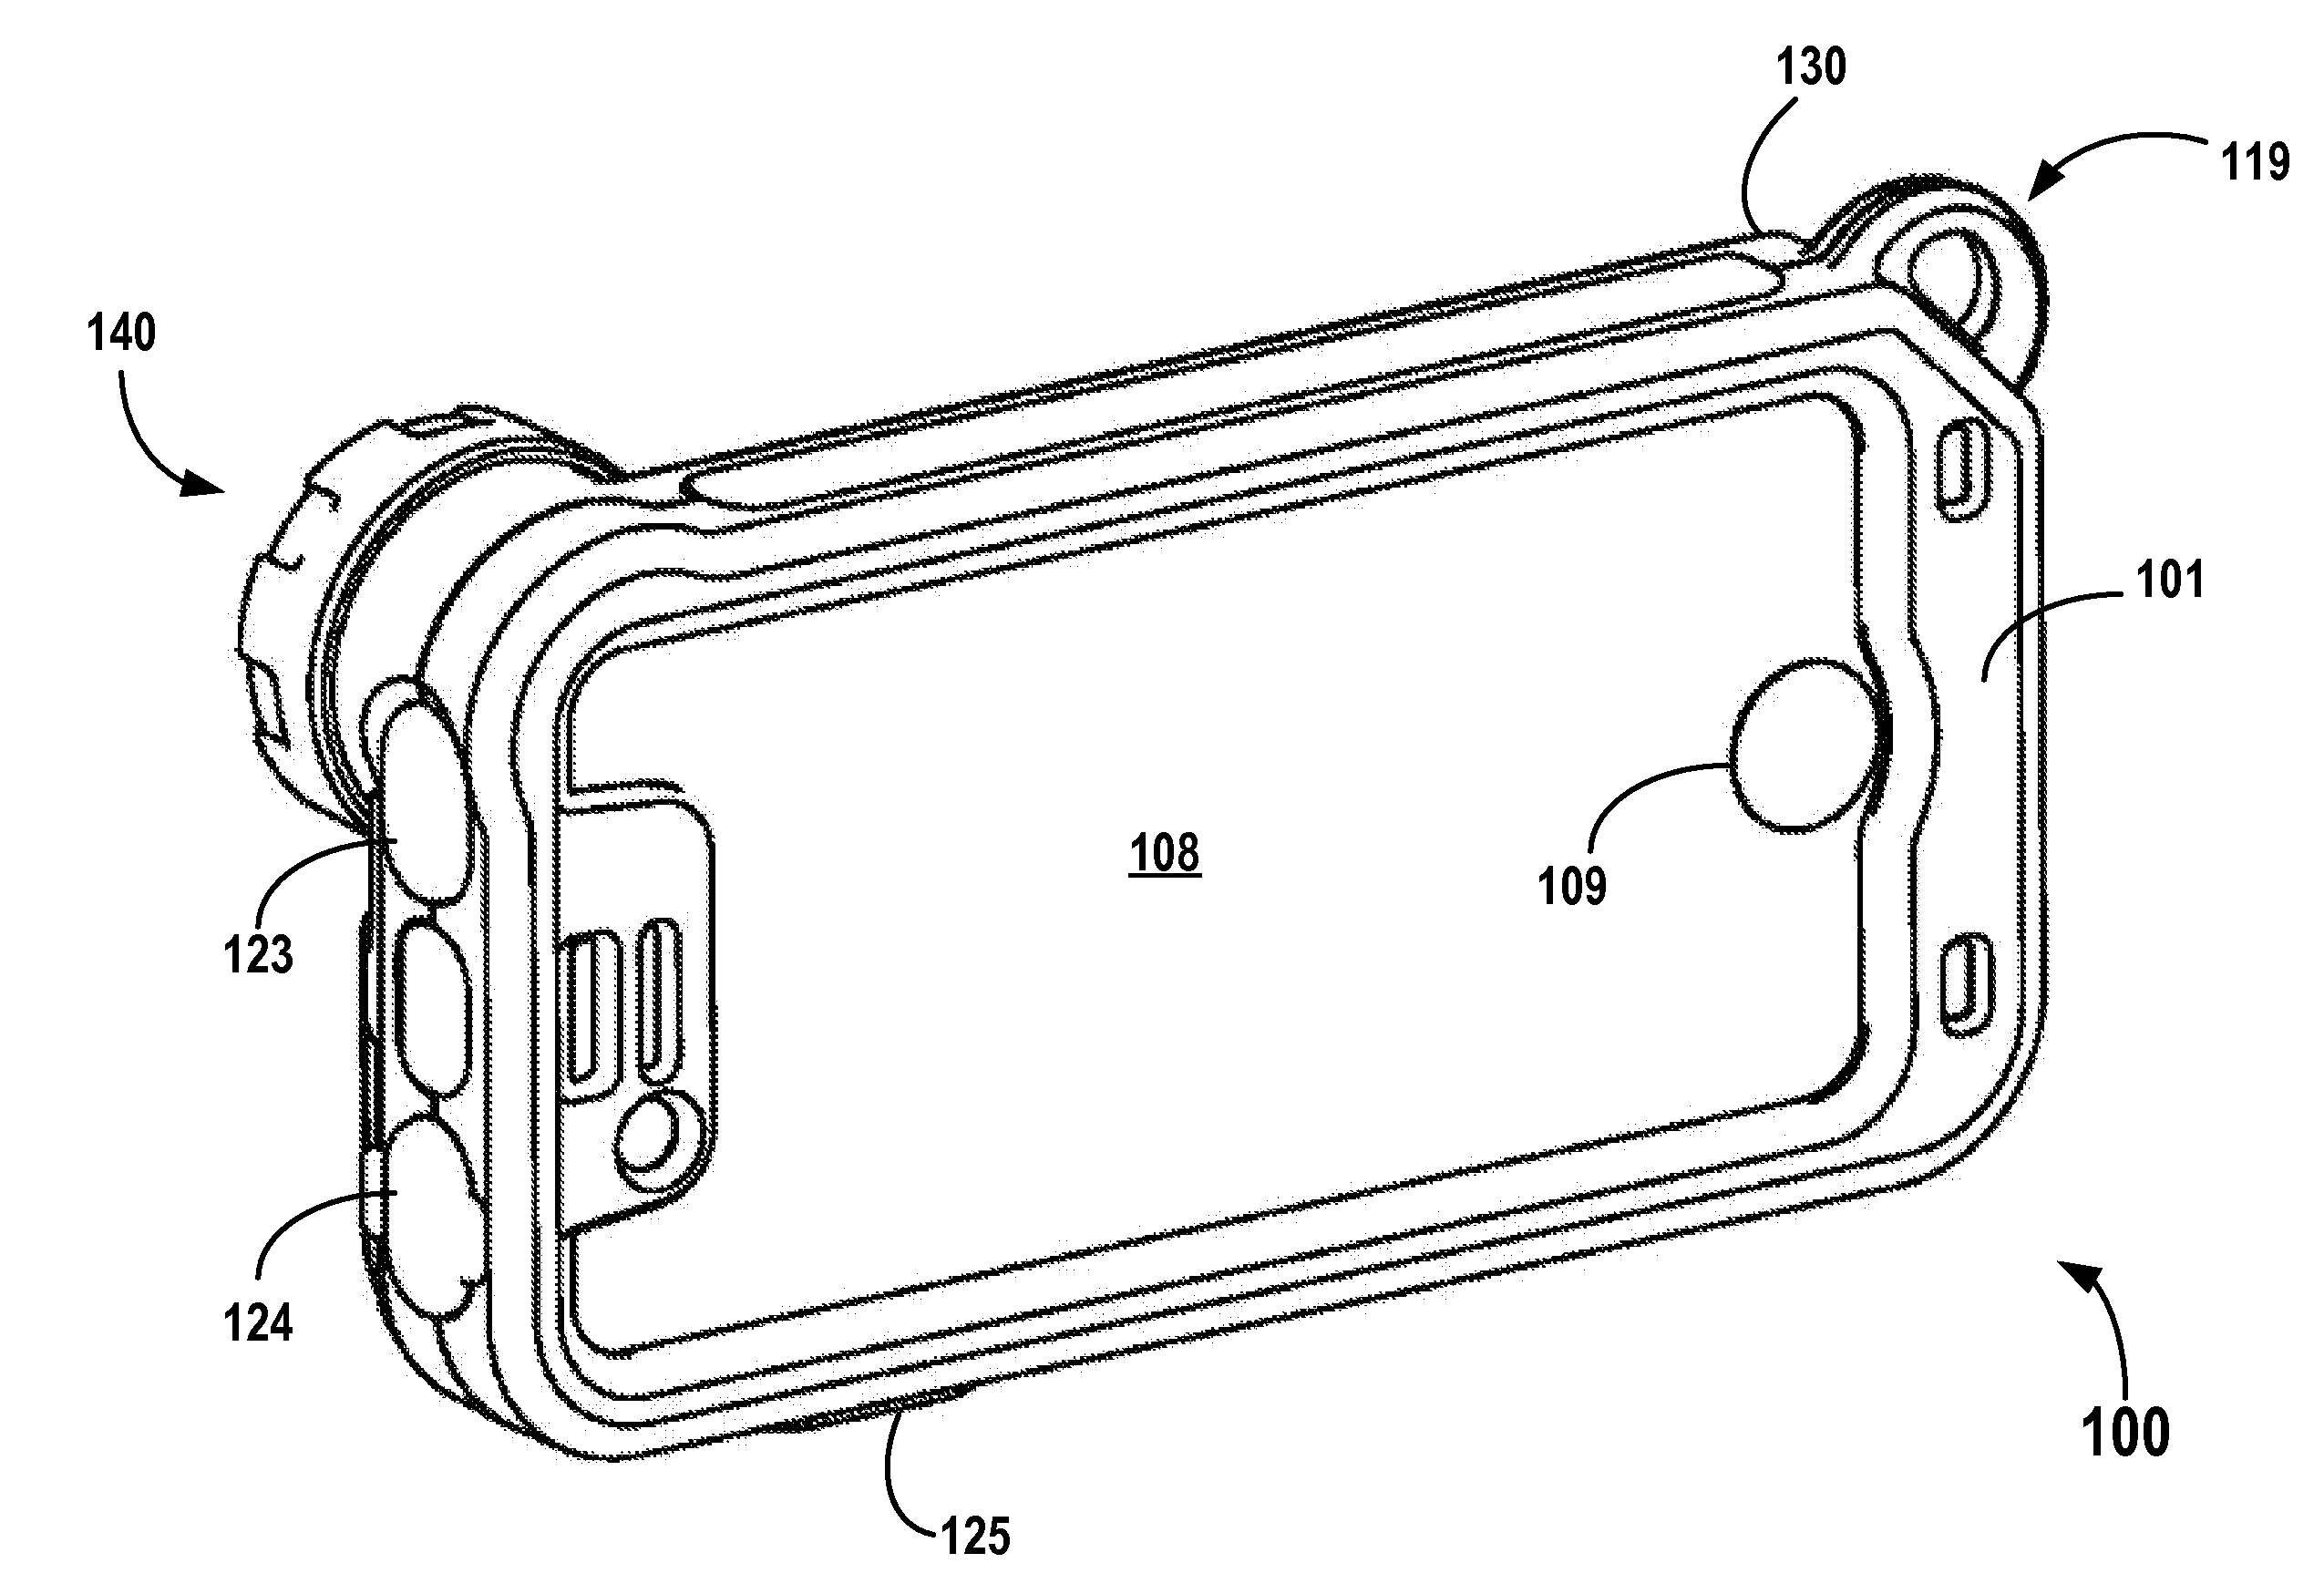 Protective cover for an electronic device